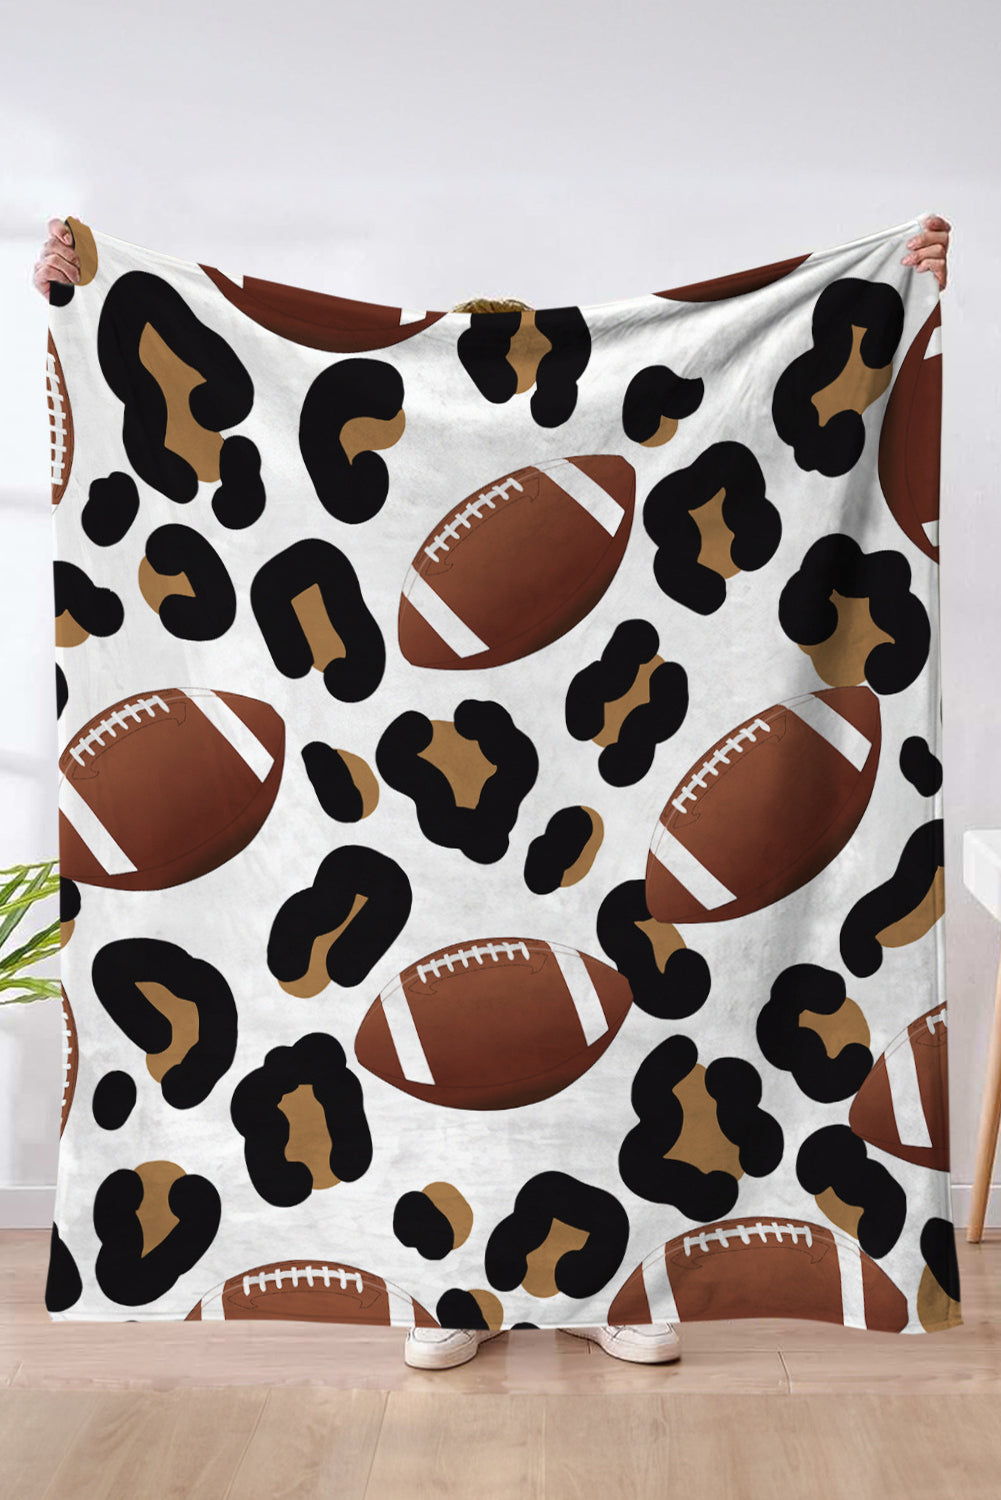 White Leopard & Rugby Print Flannel Blanket 130*150cm